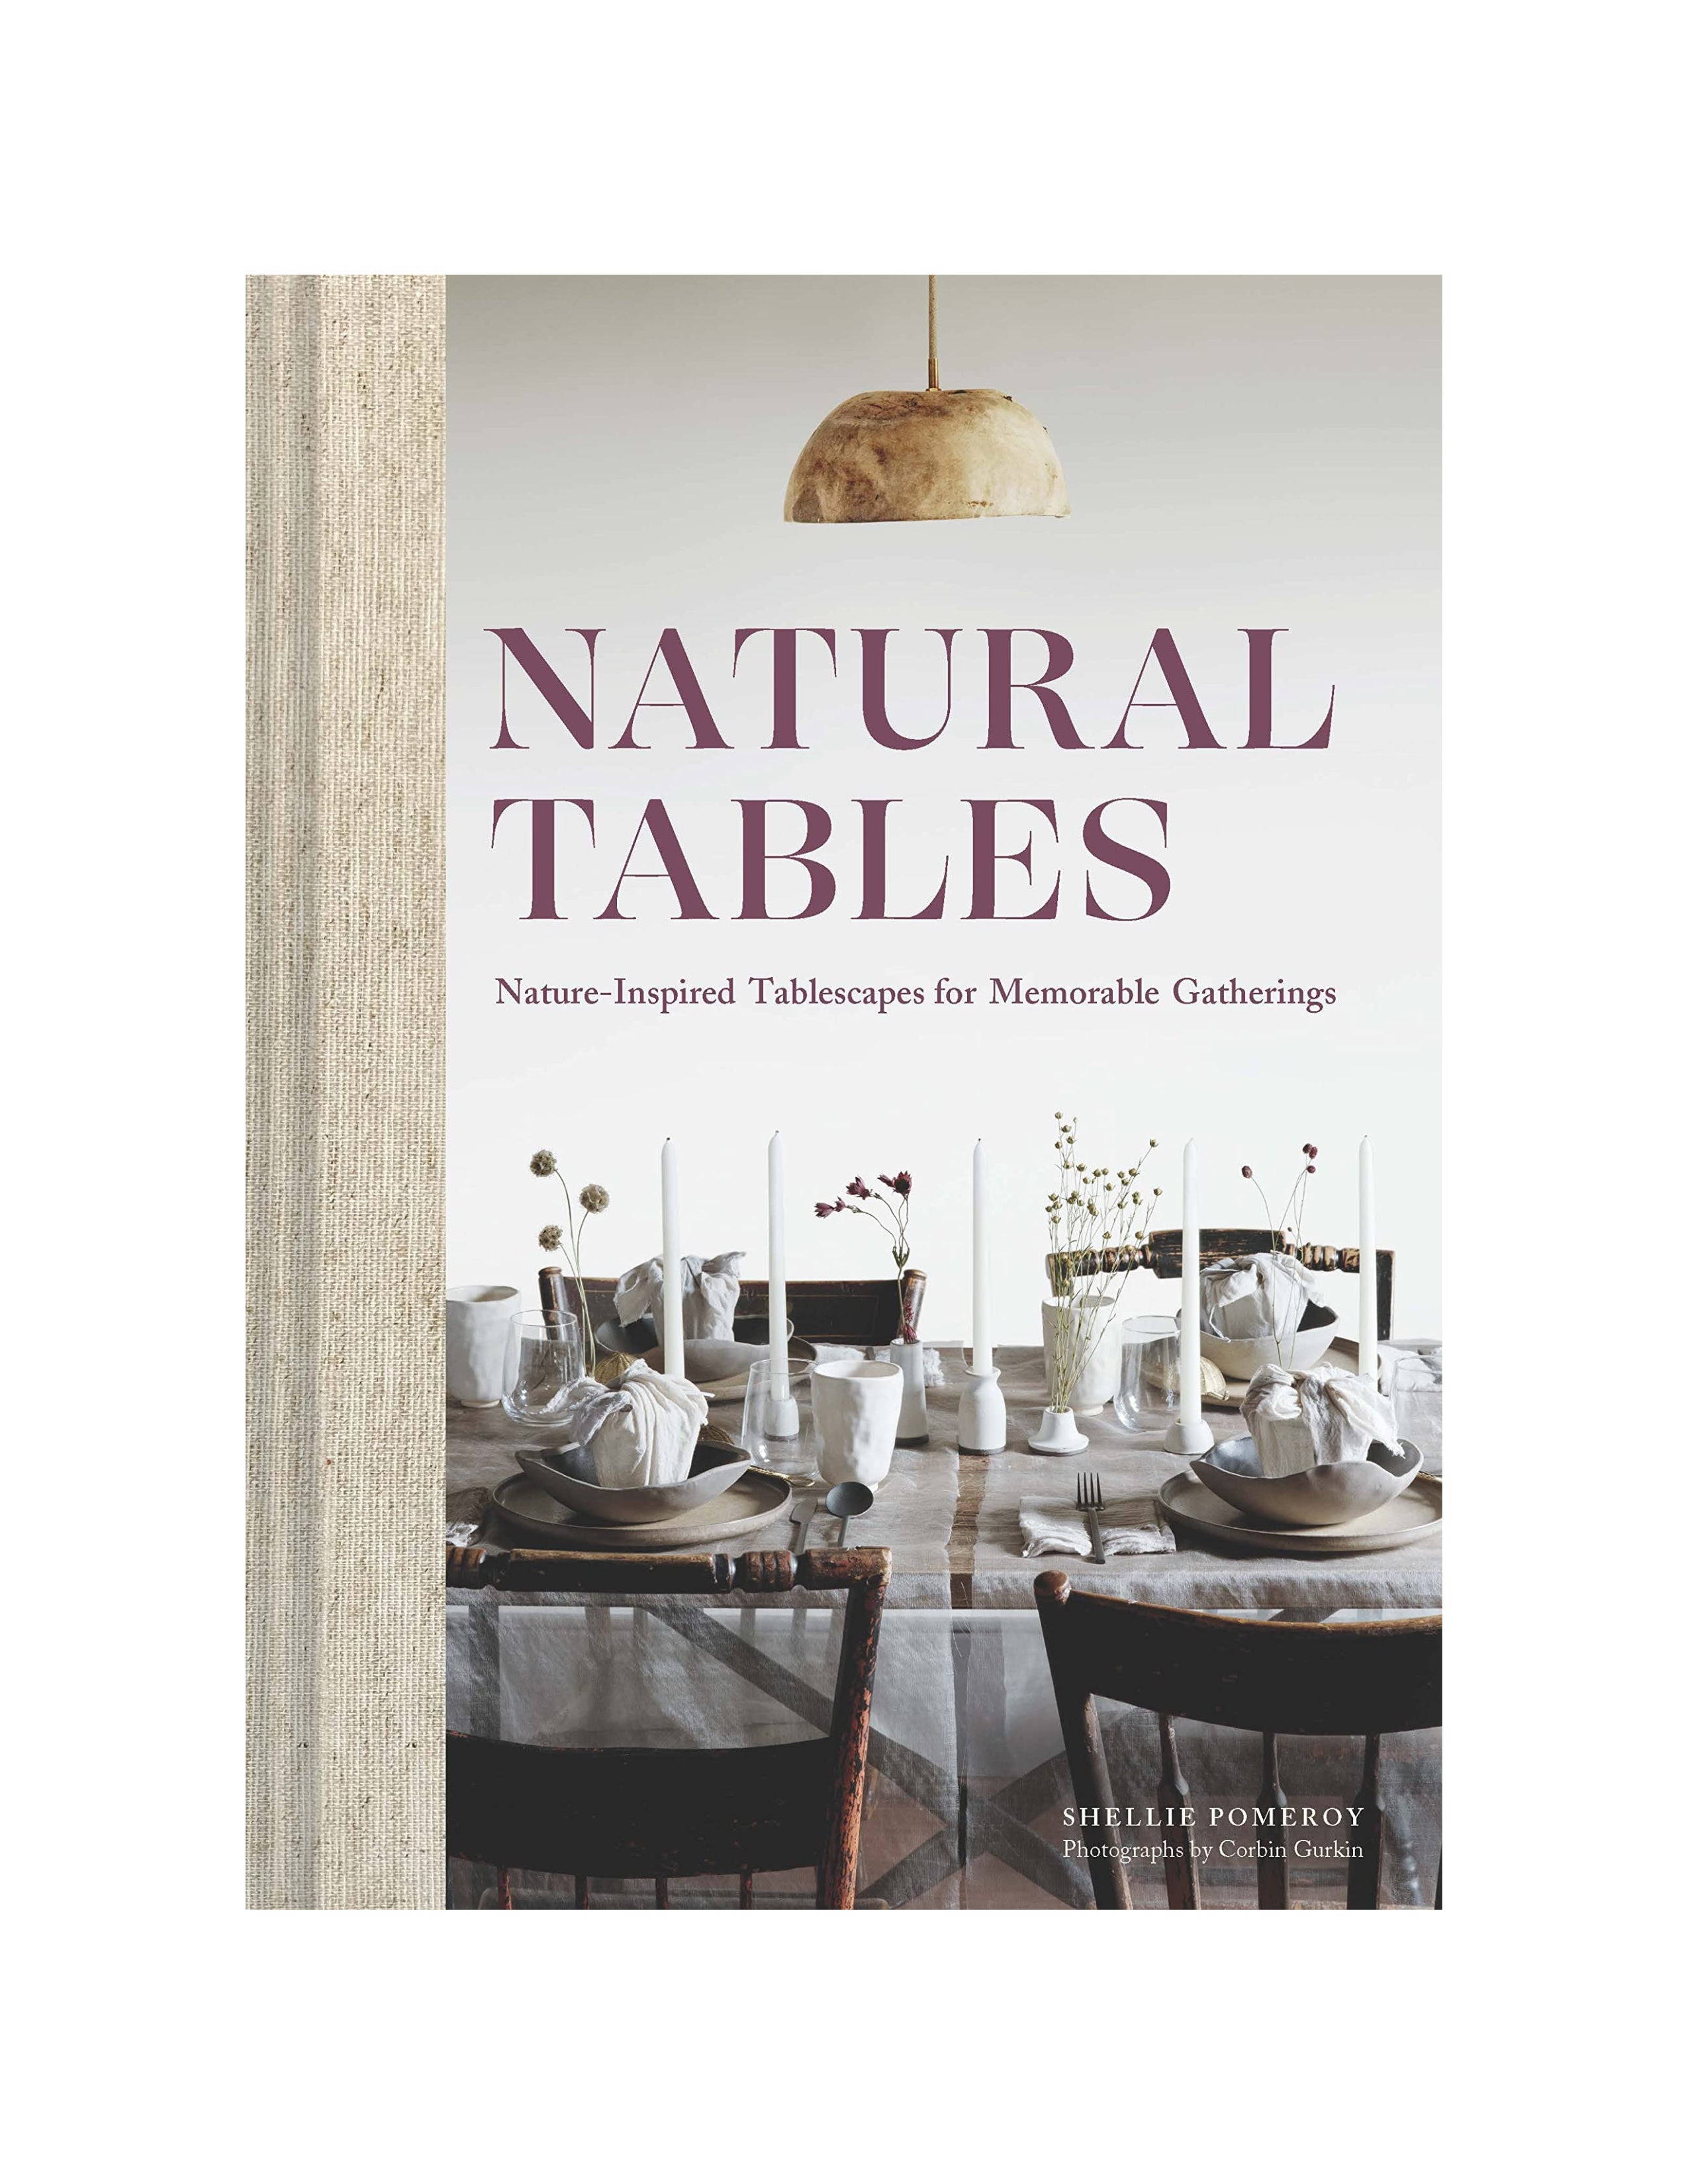 Natural Tables: Nature-Inspired Tablescapes for Memorable Gatherings